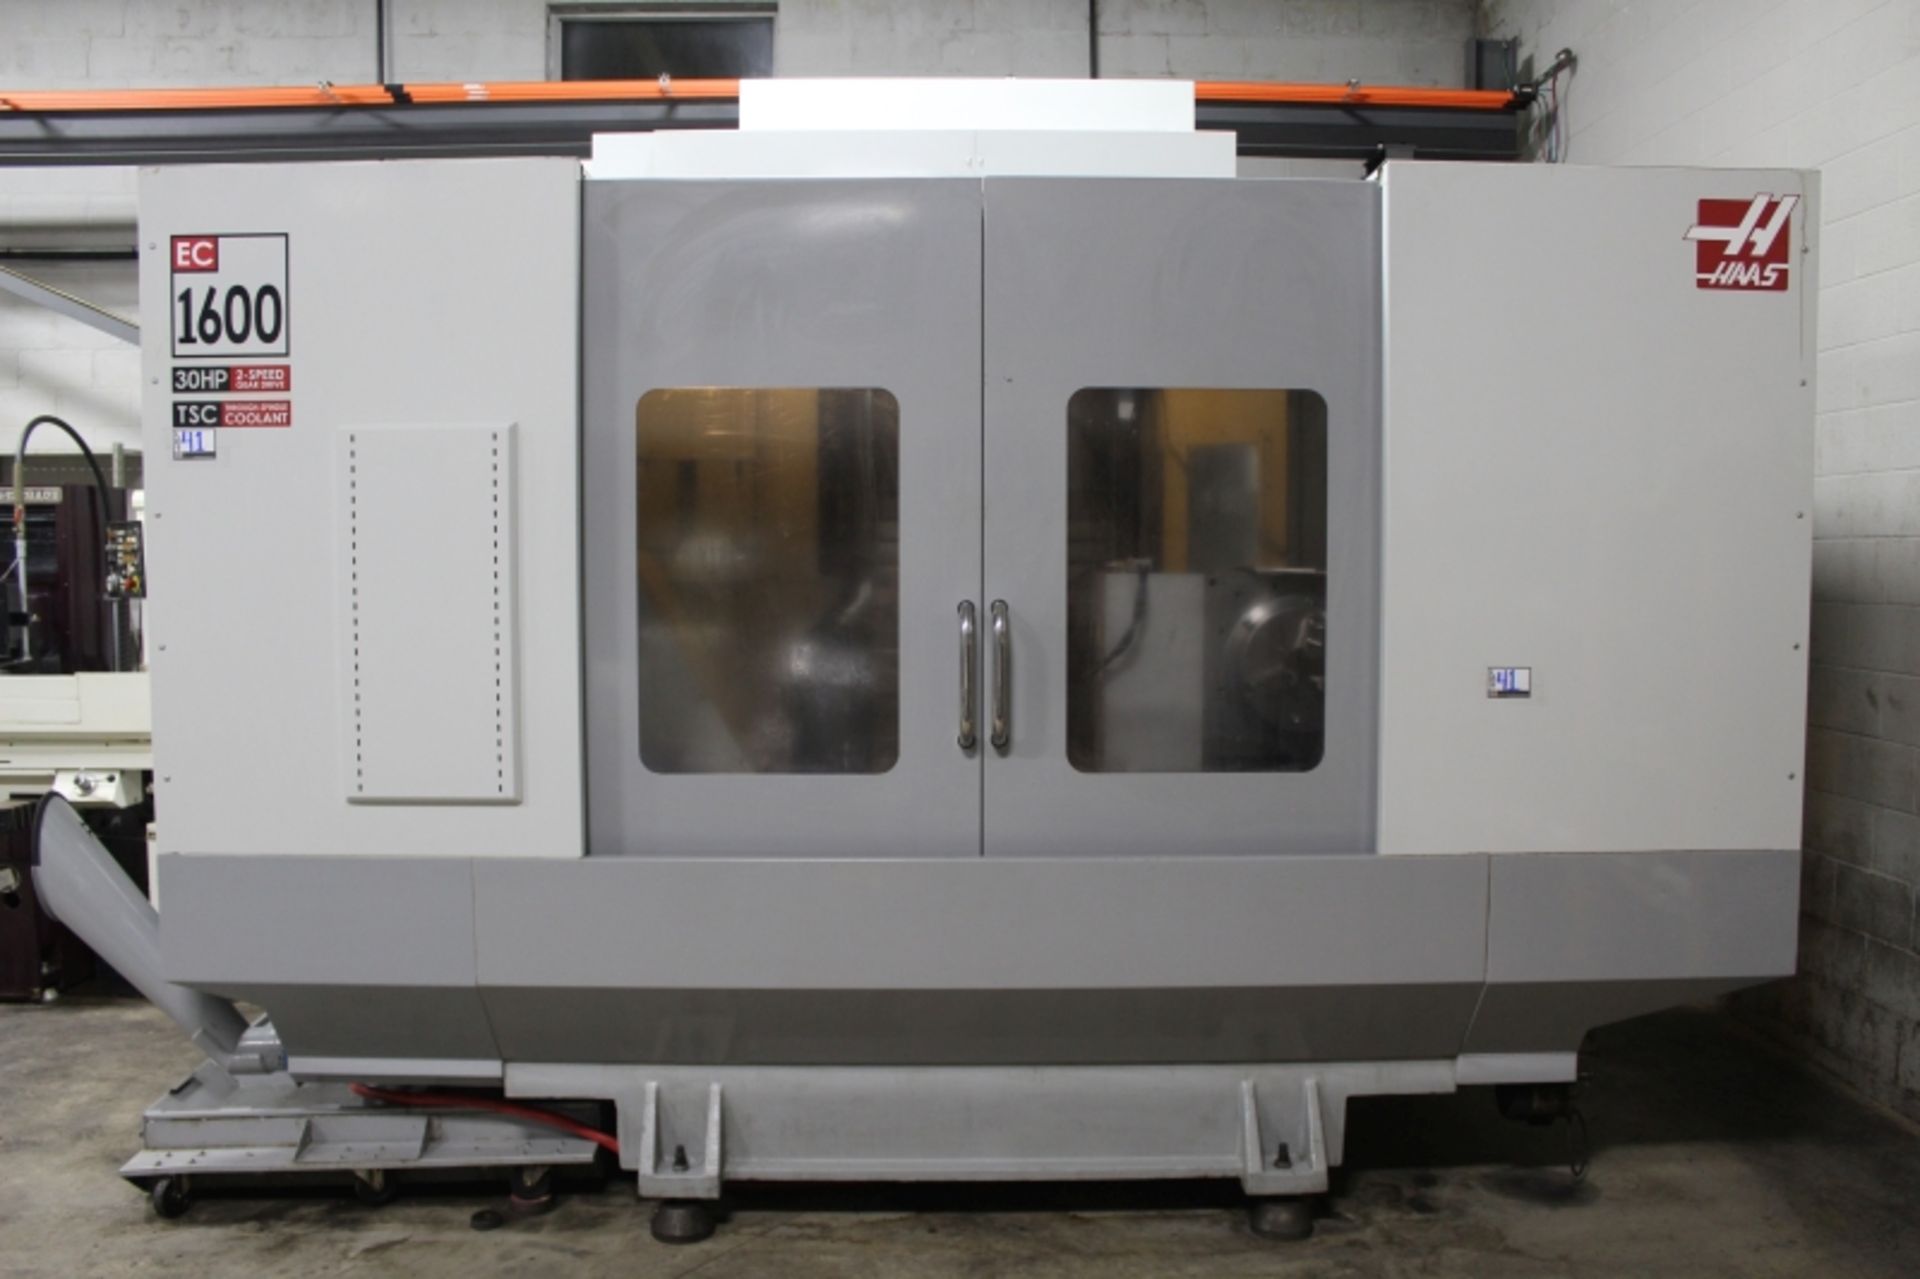 Haas EC-1600-4X, 5-Axis, 64” x 50” x 32” trvls, 7500 RPM, CT50, 30 ATC, CTS, S/N 2052737, New - Image 2 of 13